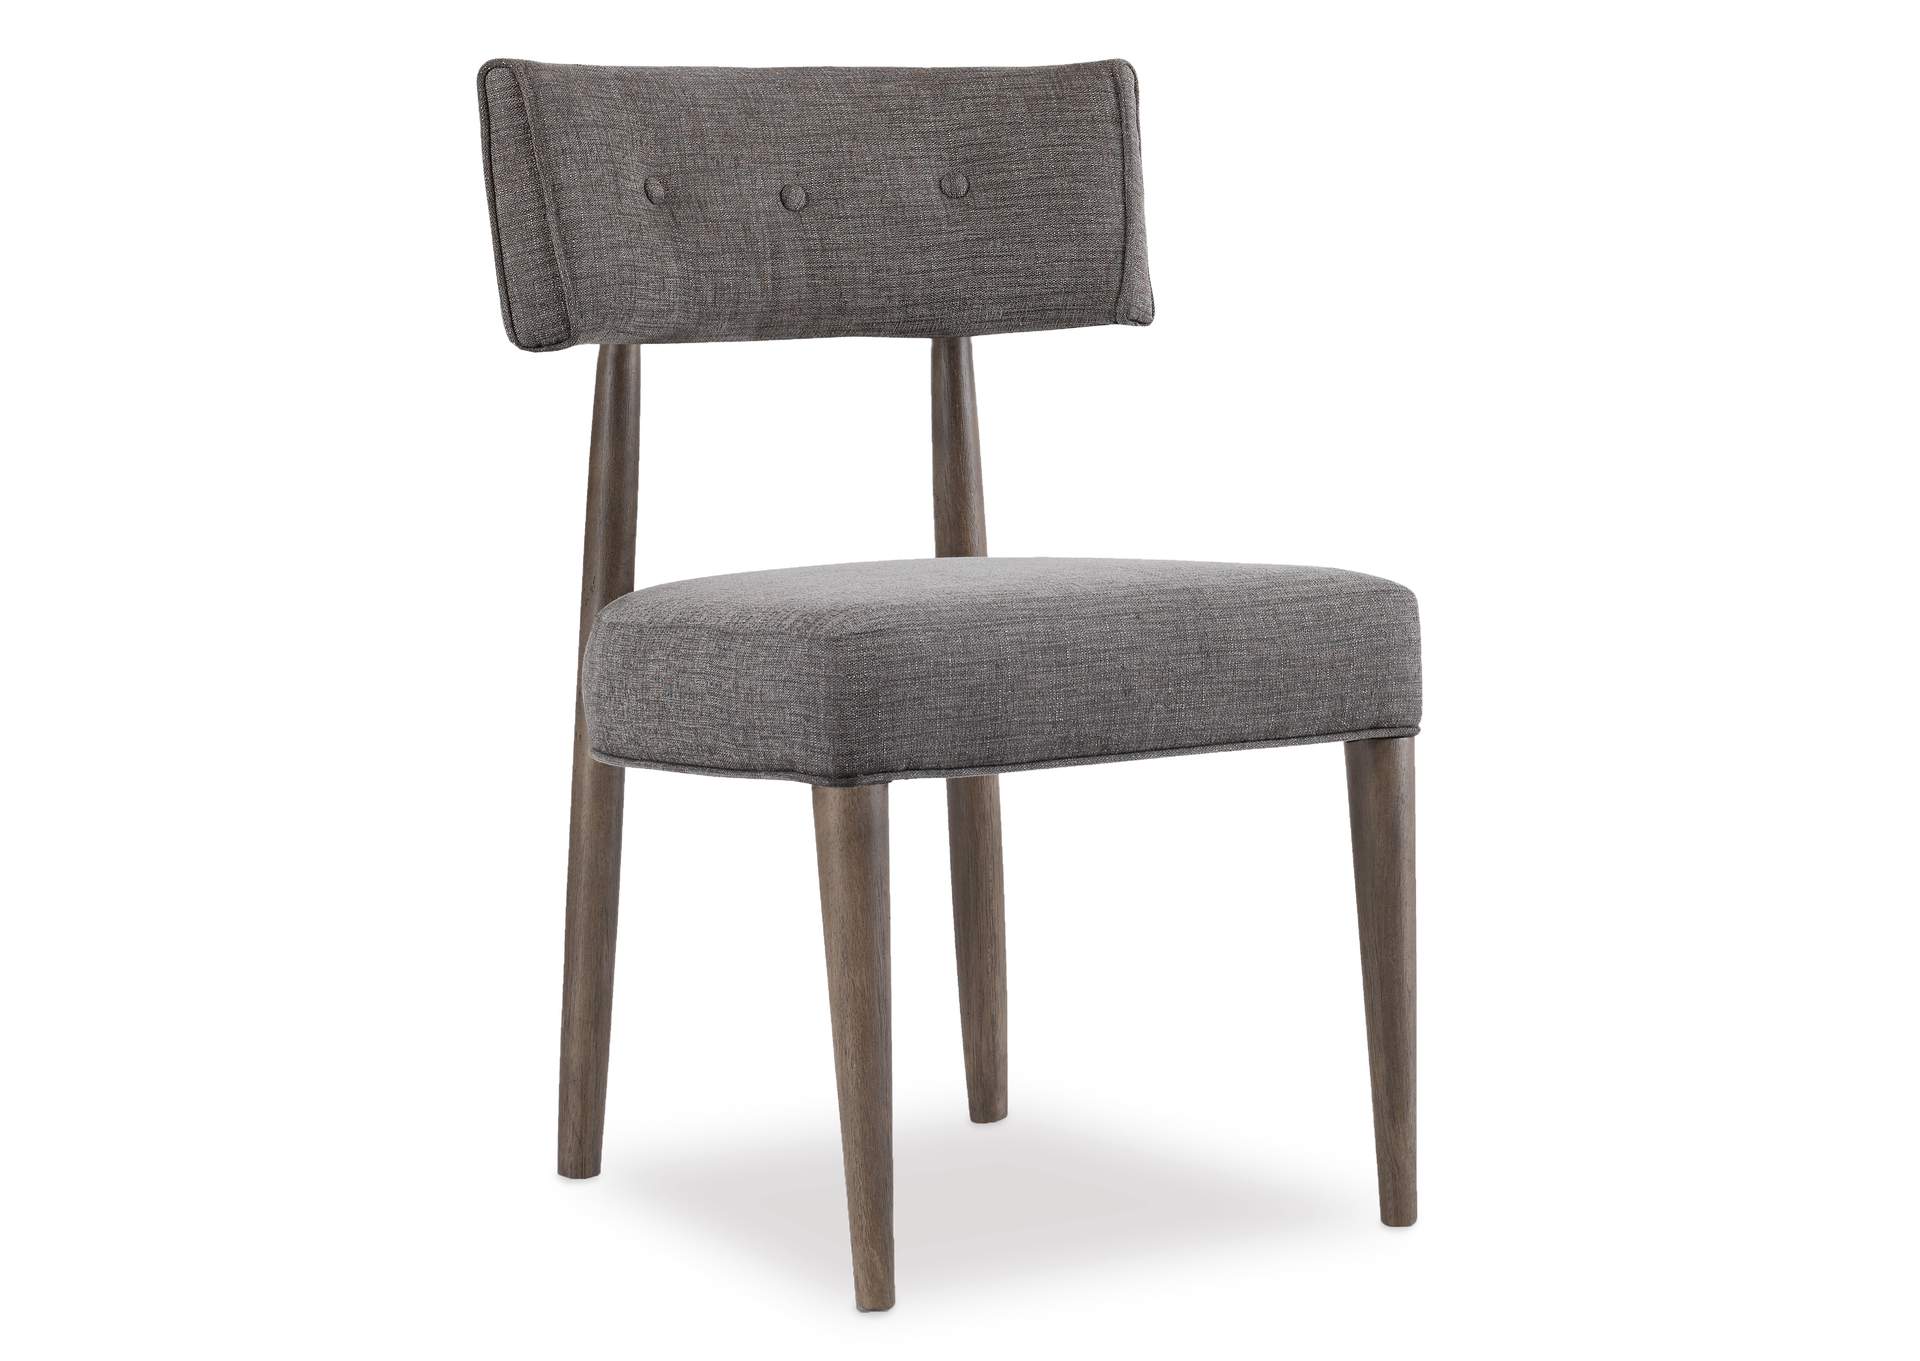 Curata Upholstered Chair,Hooker Furniture